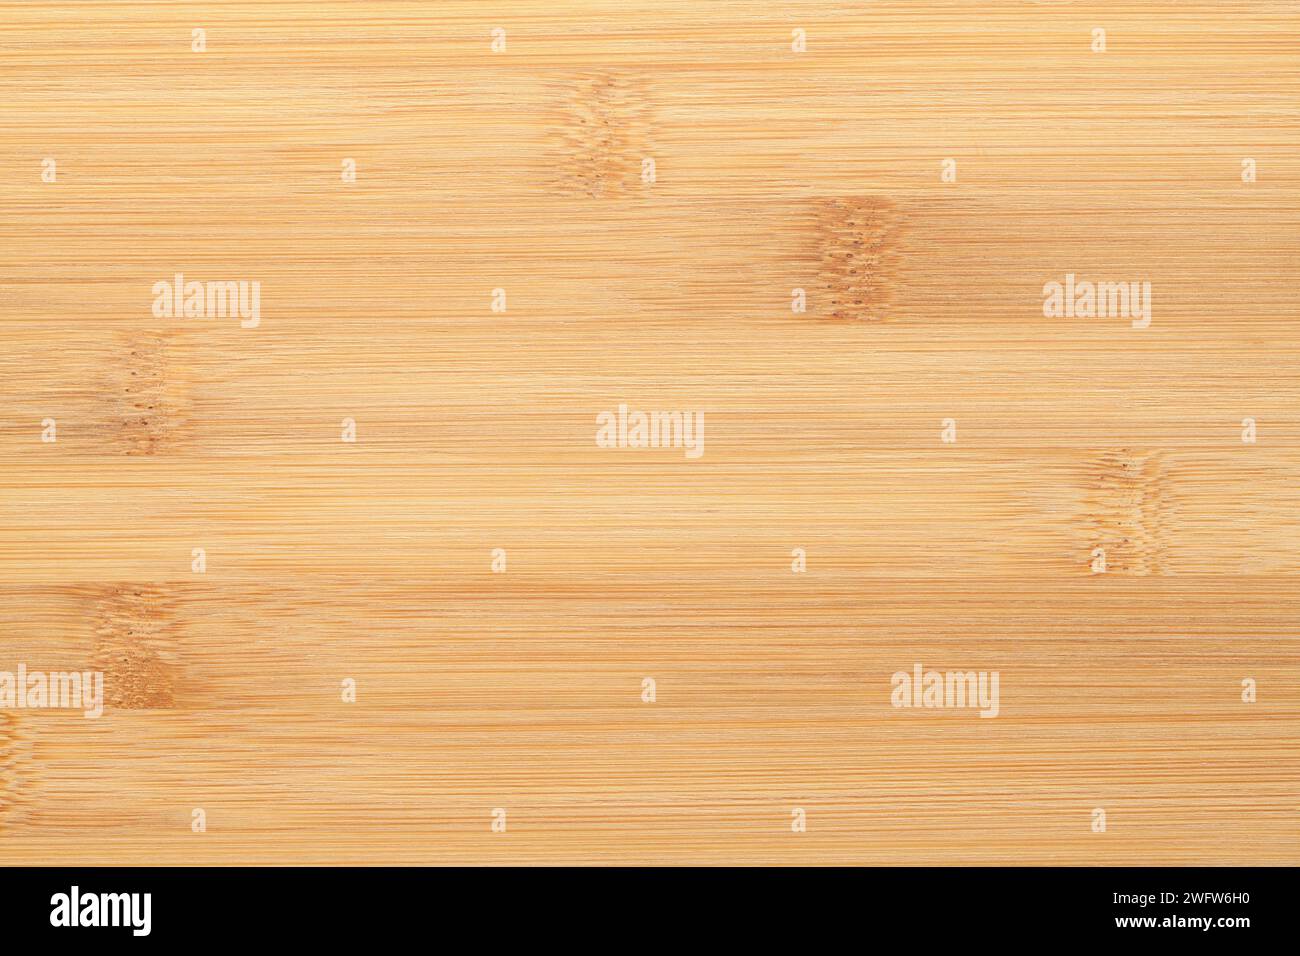 Flat Bamboo Board with Wood Grain Texture Background. Stock Photo